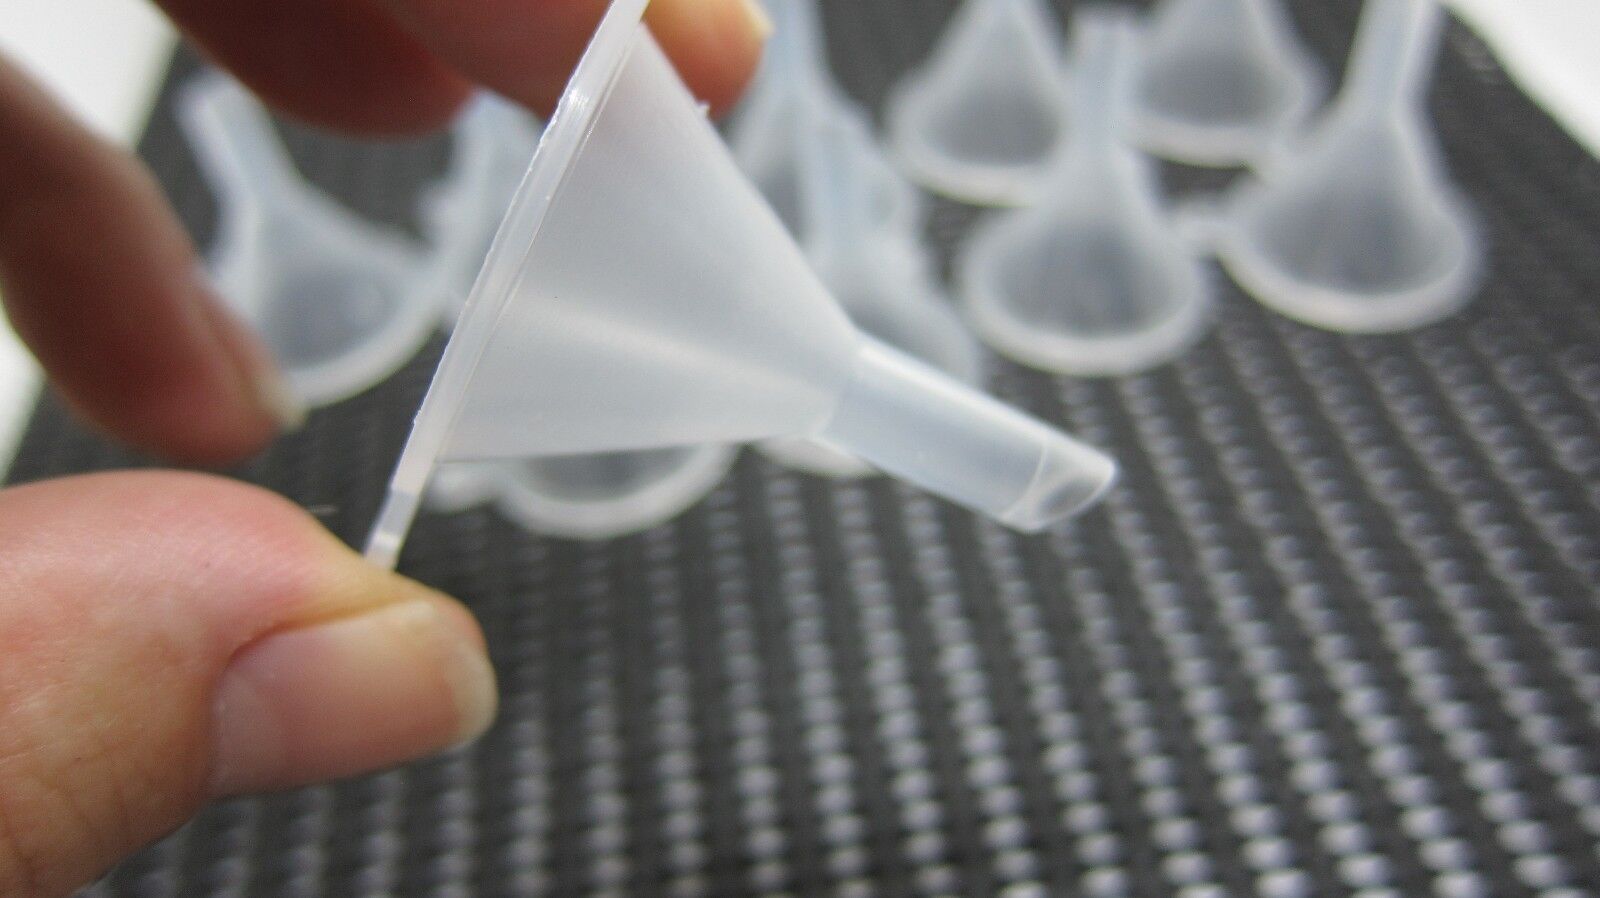 10 pcs Tiny Plastic Mini Funnel For Perfume Diffuser Liquid Oil Funnels  Unbranded Does Not Apply - фотография #3